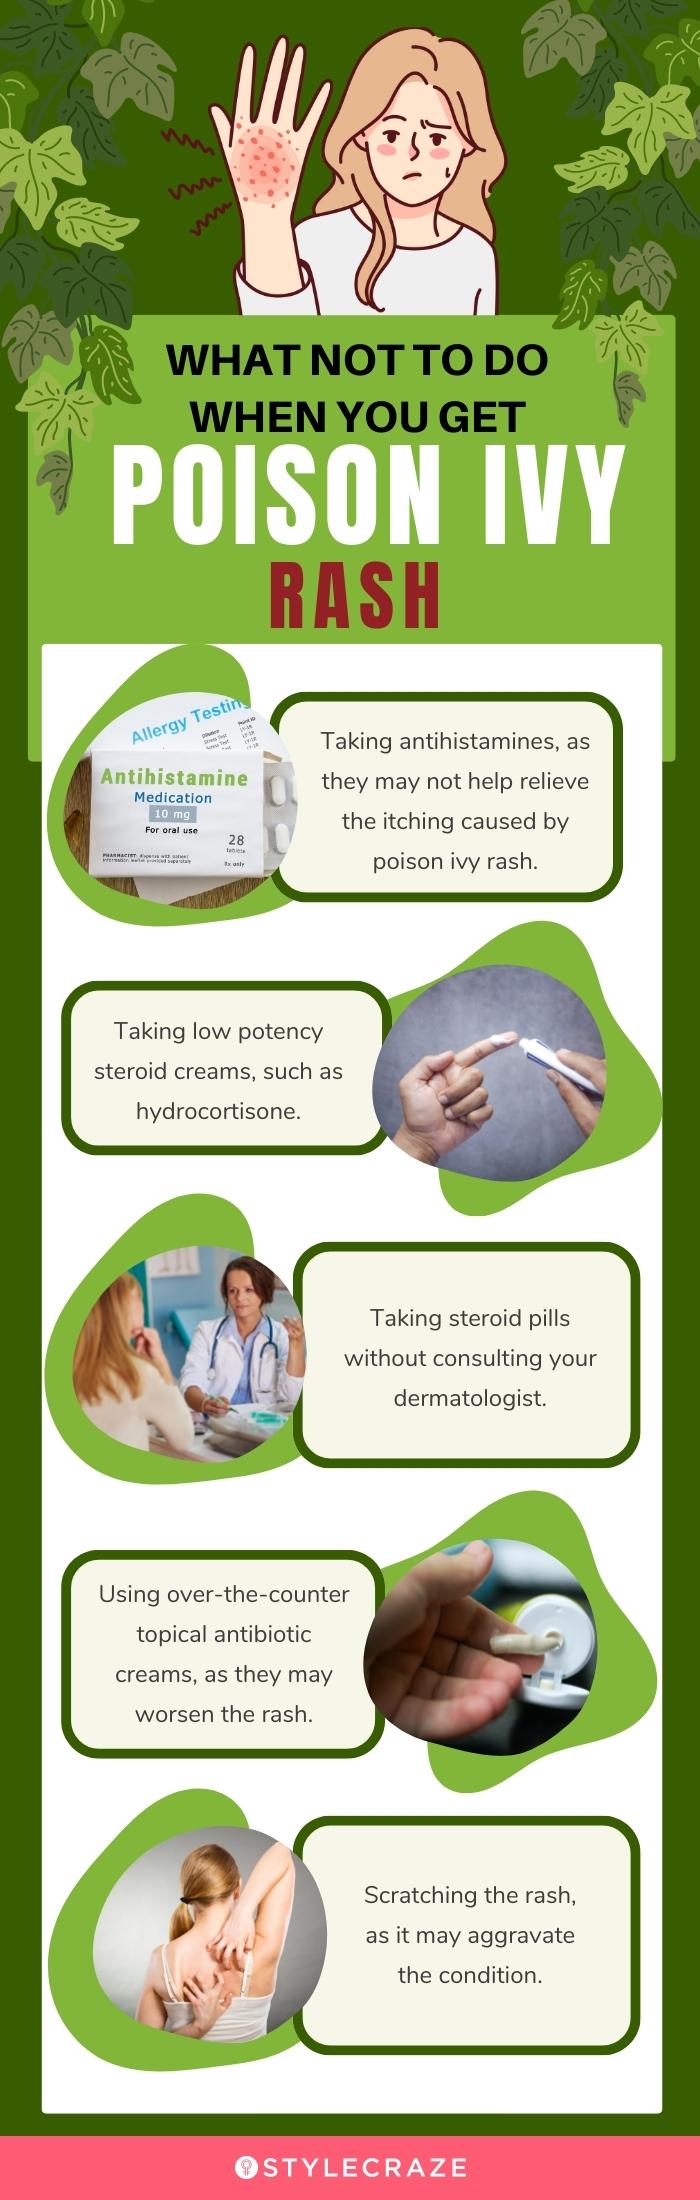 what not to do when you get poison ivy rash [infographic]